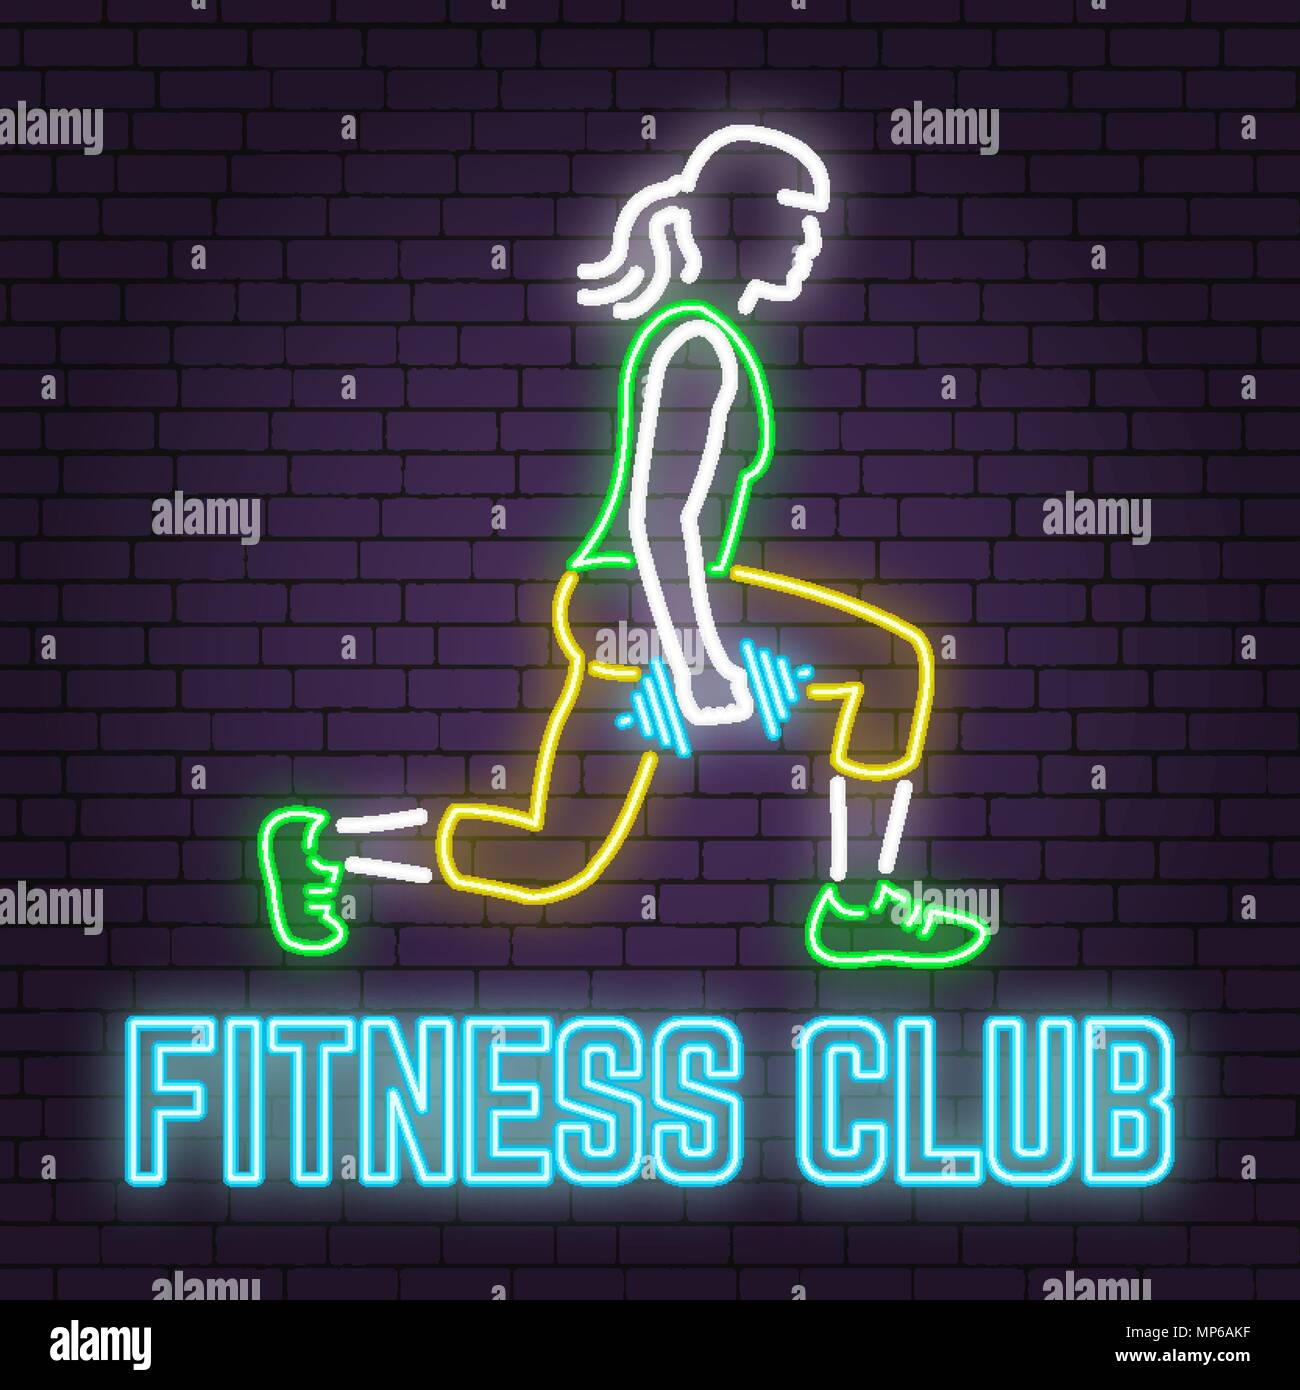 Neon fitness club sign on brick wall background. Vector illustration. Women workout with dumbbells. Neon design for fitness centers emblems, gym signs related health and gym business. Advertisement sign. Stock Vector